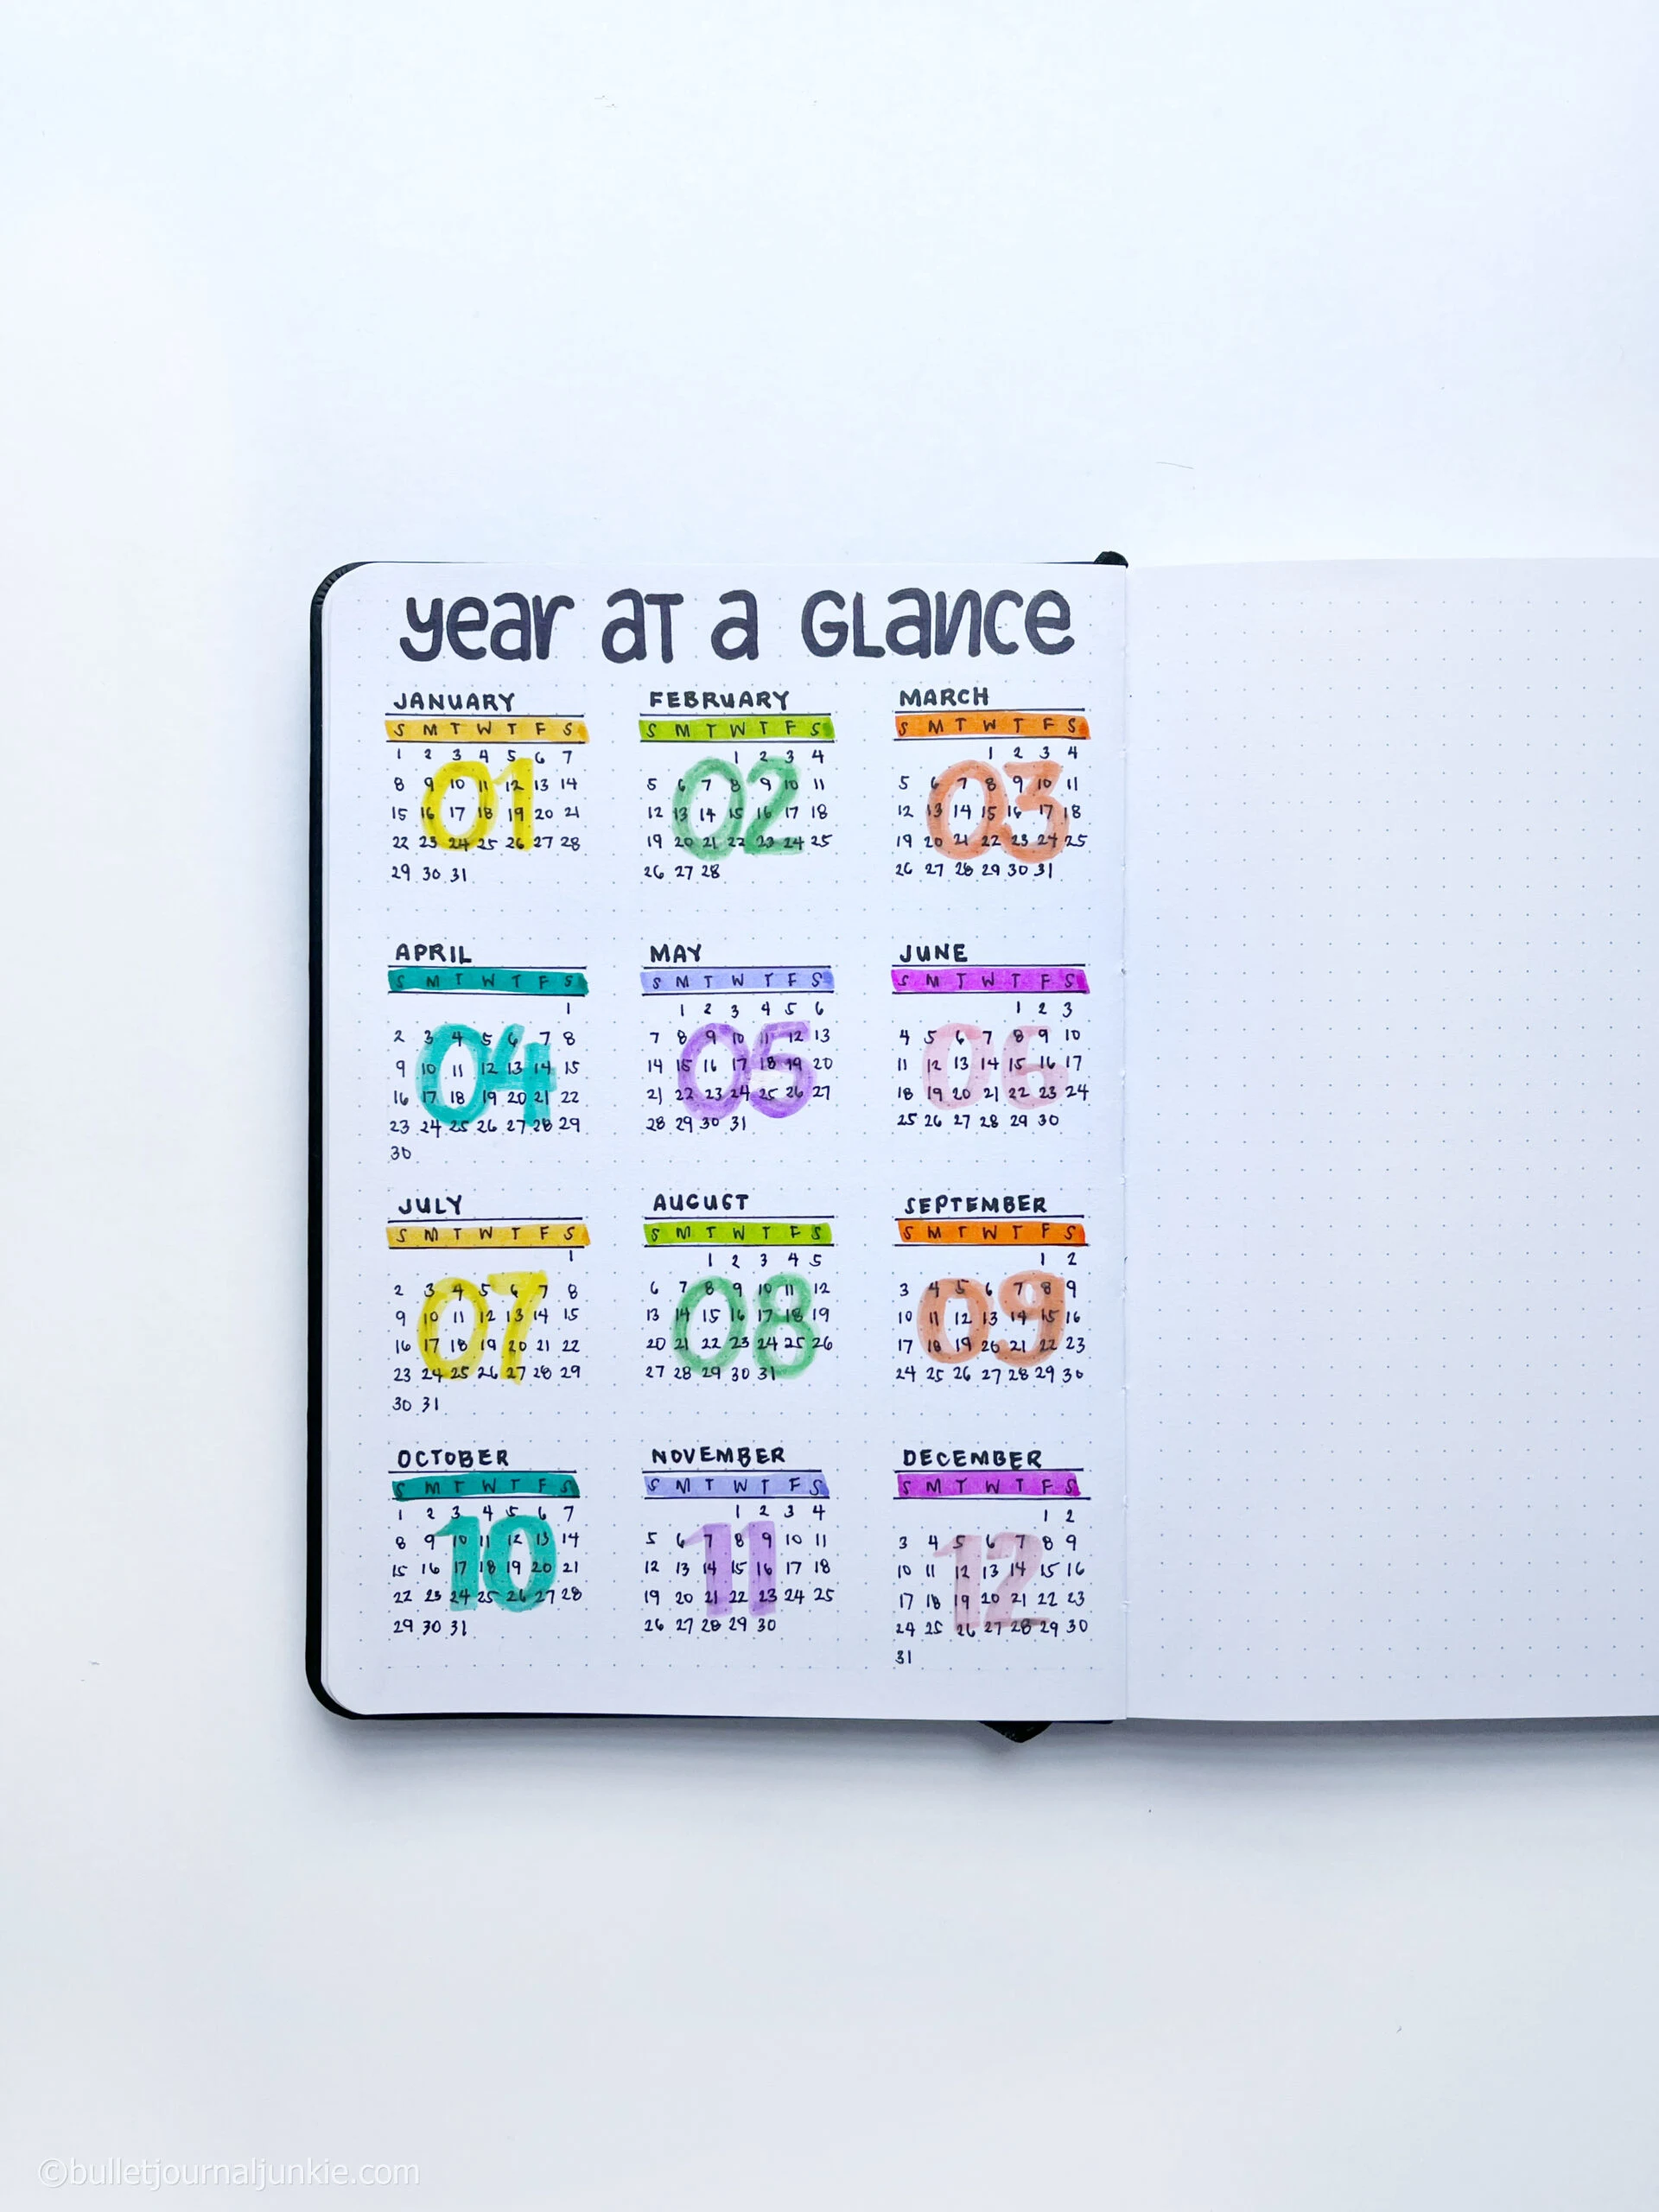 A beautifully decorated year at a glance bullet journal layout.